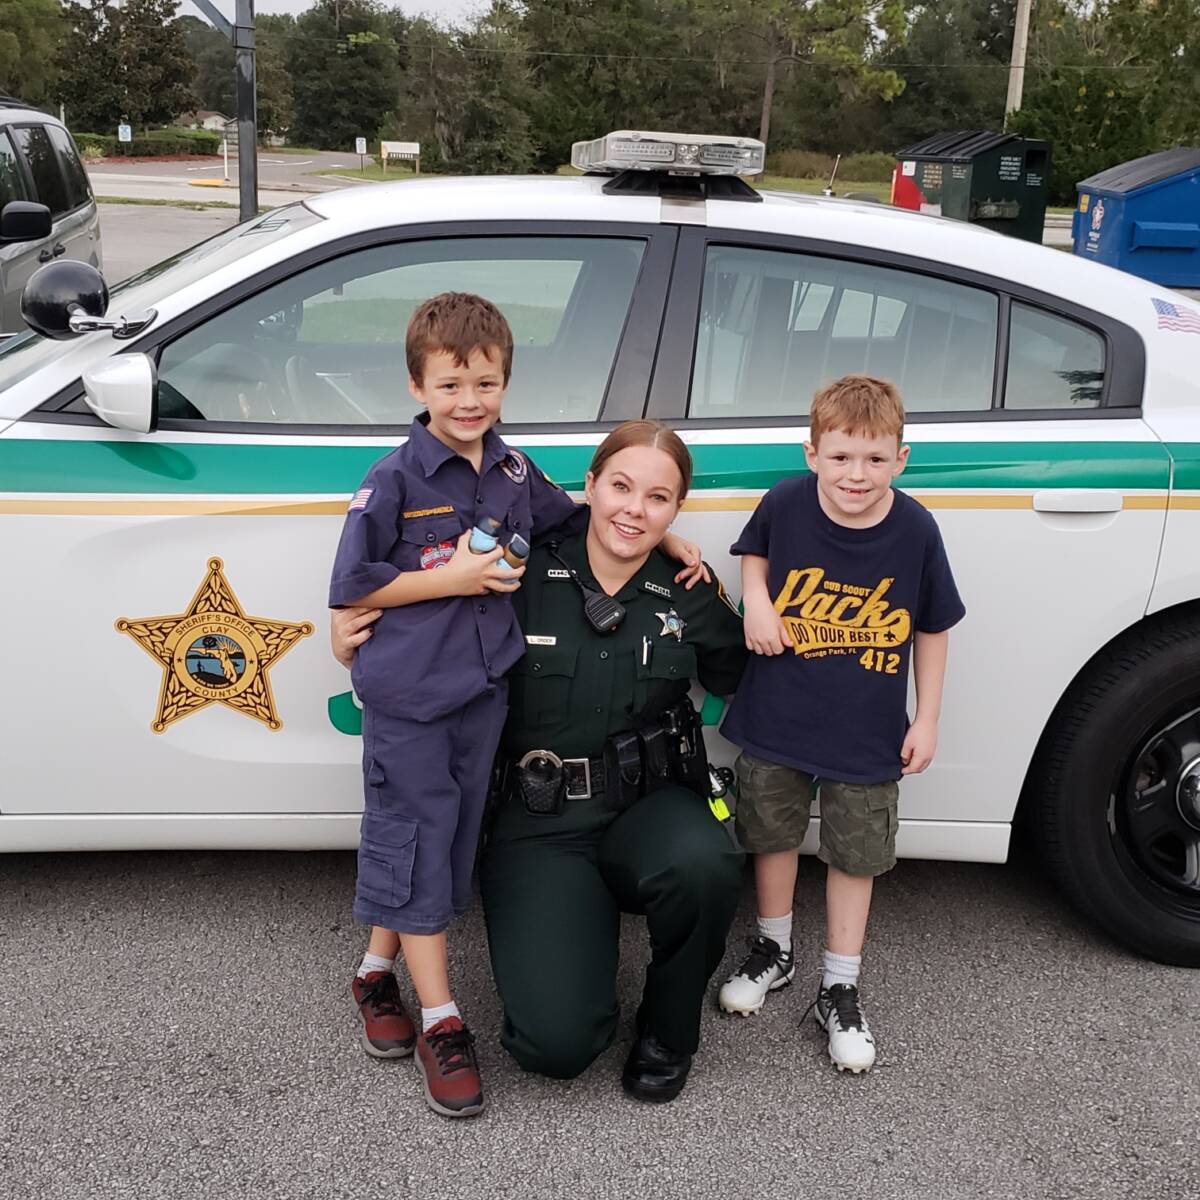 Sheriff hugging two children next to car